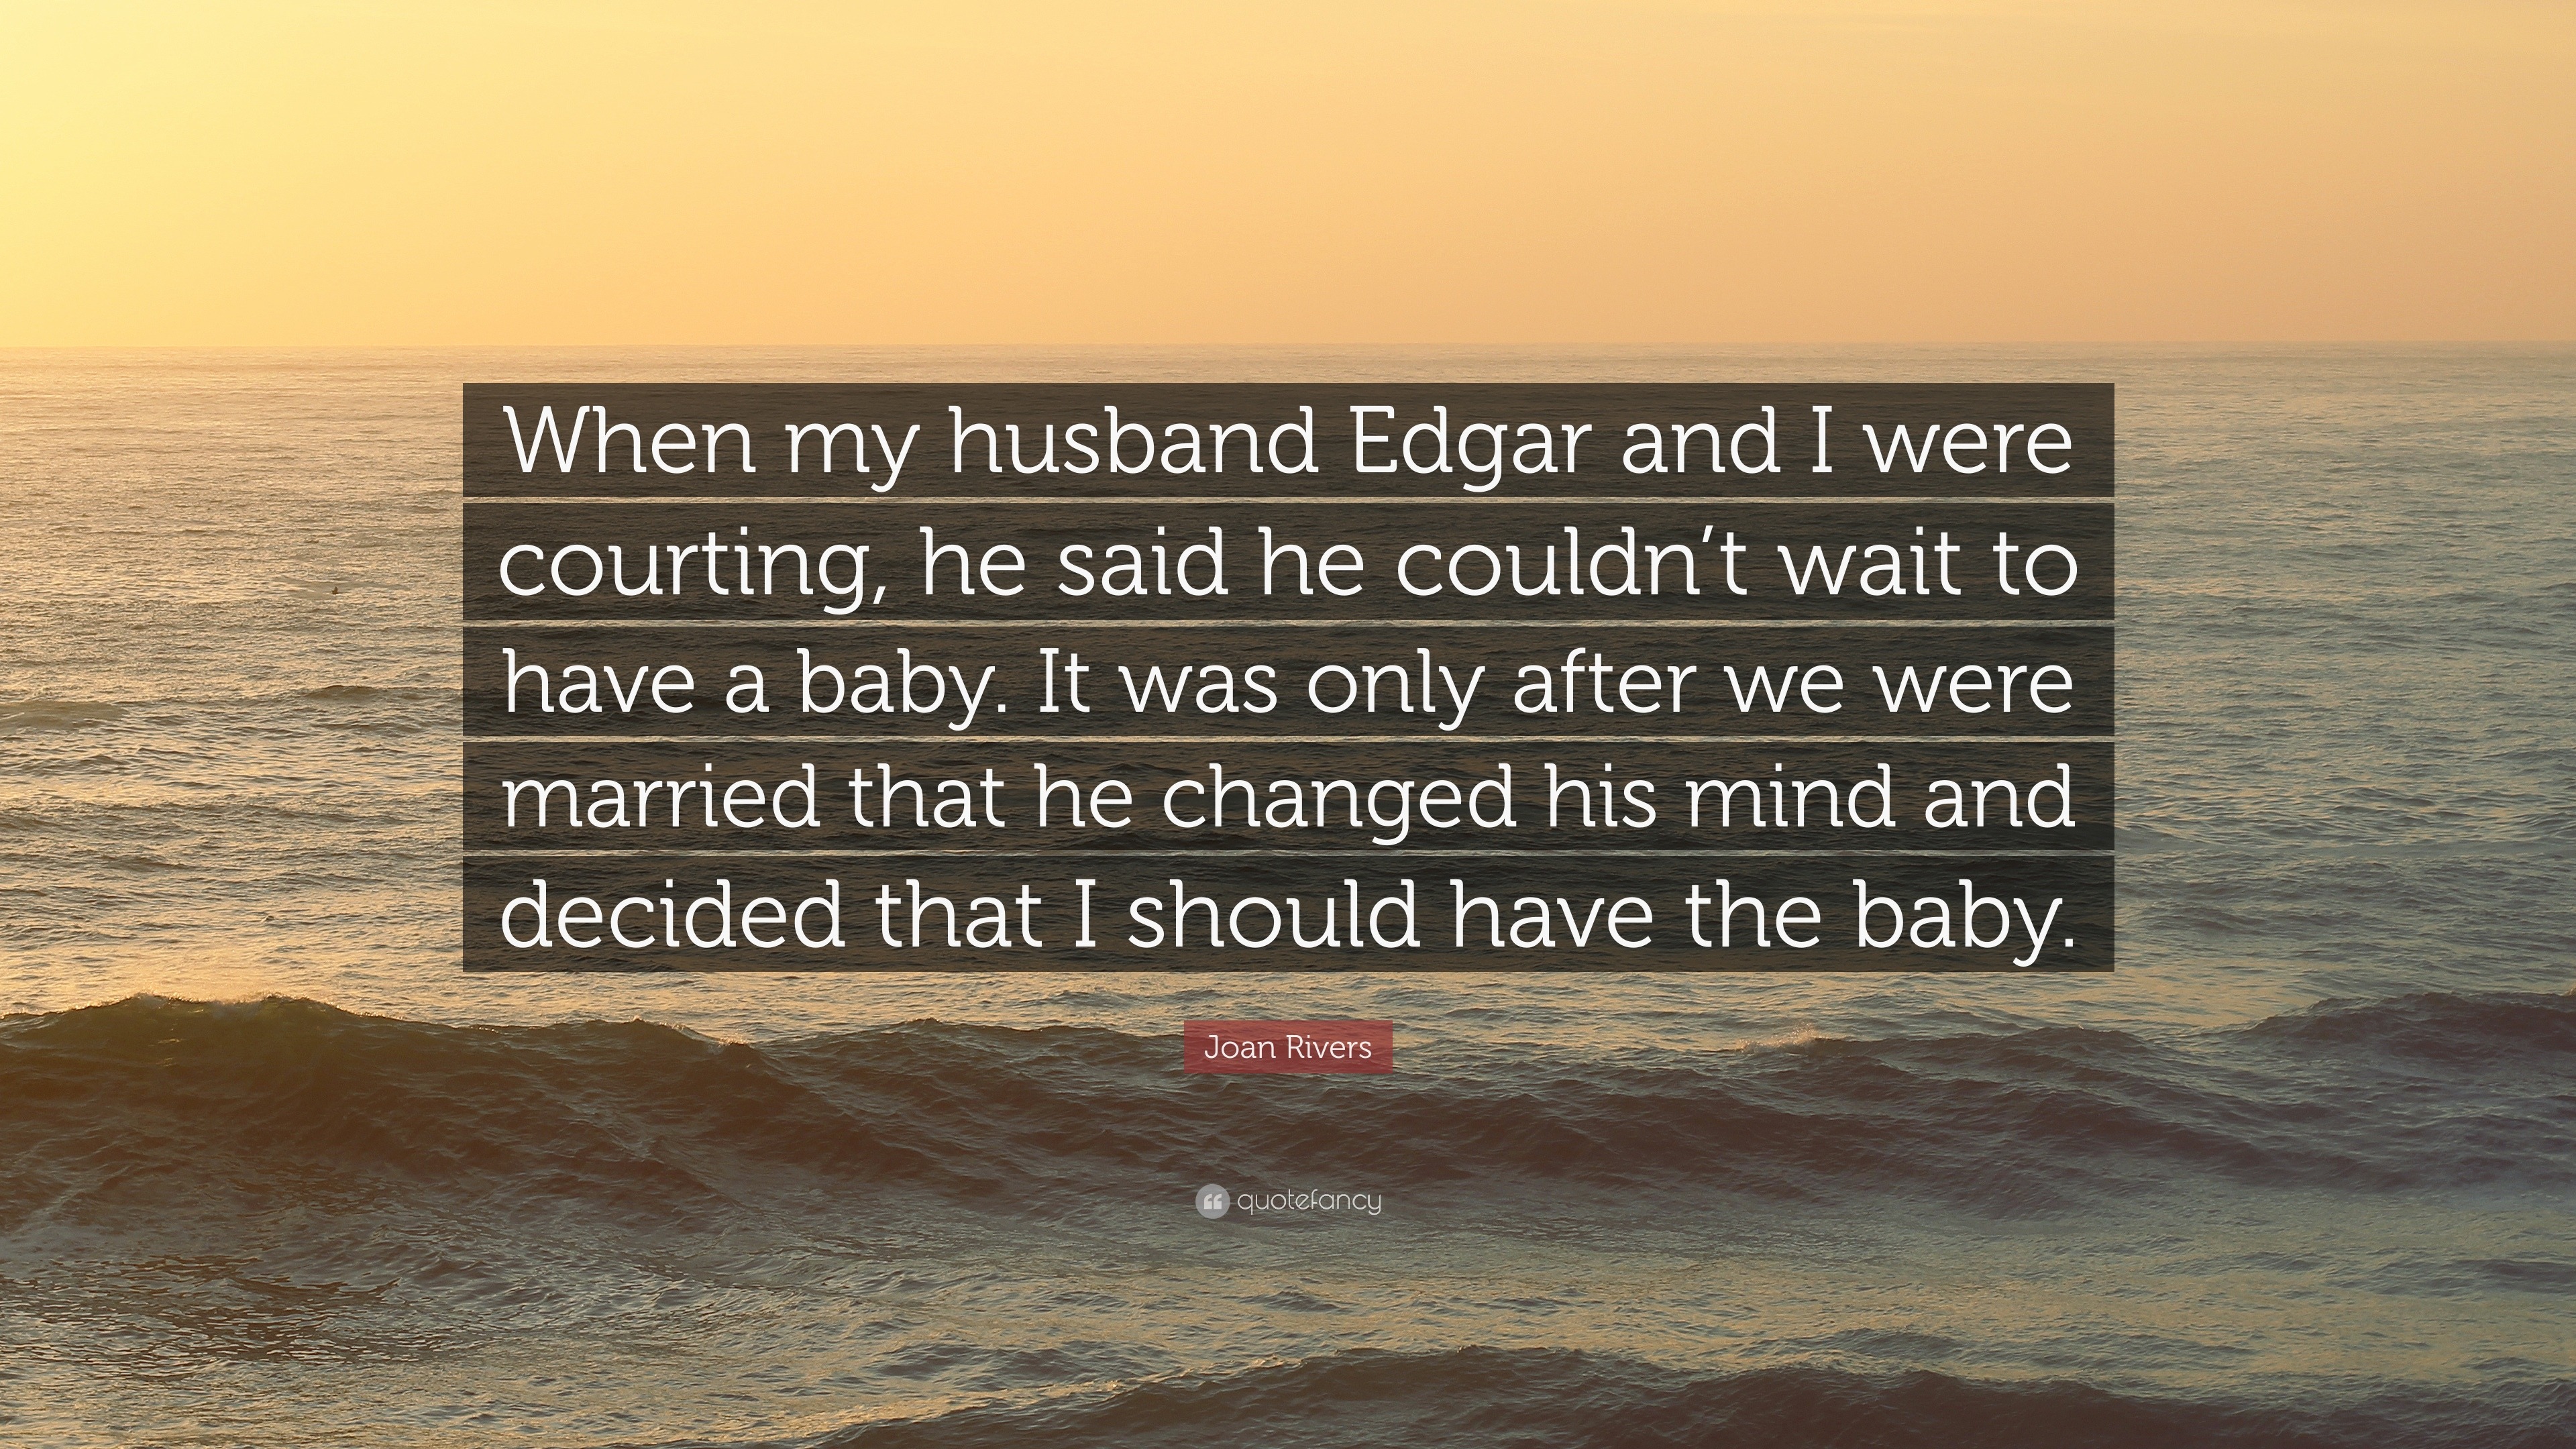 Joan Rivers Quote: “When my husband Edgar and I were courting, he